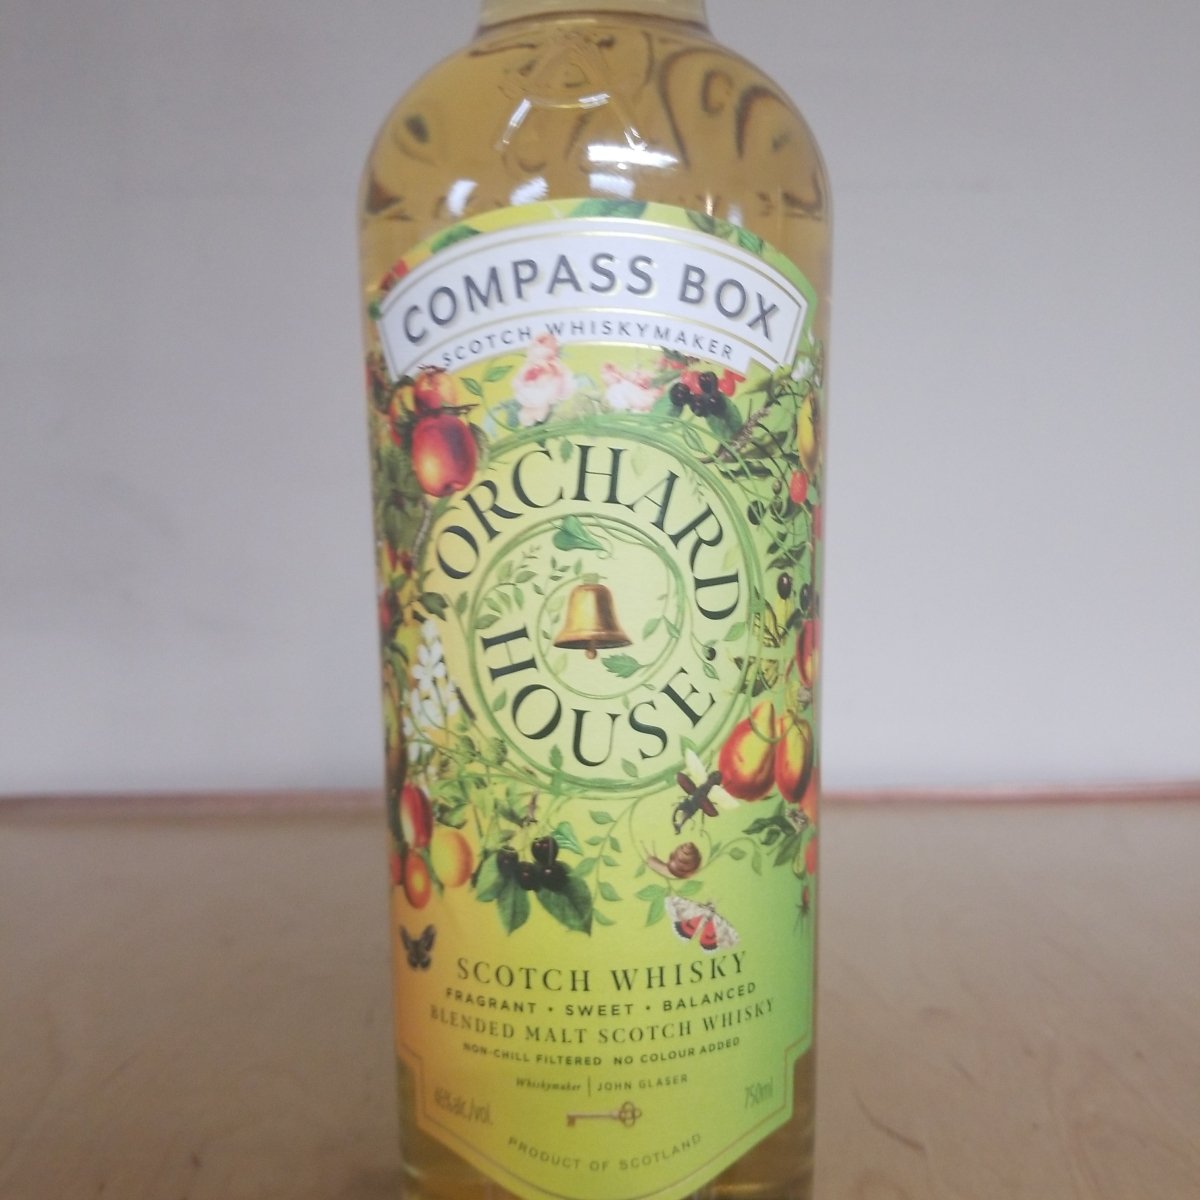 Compass Box Orchard House Blended Scotch 750ml - Sip & Say